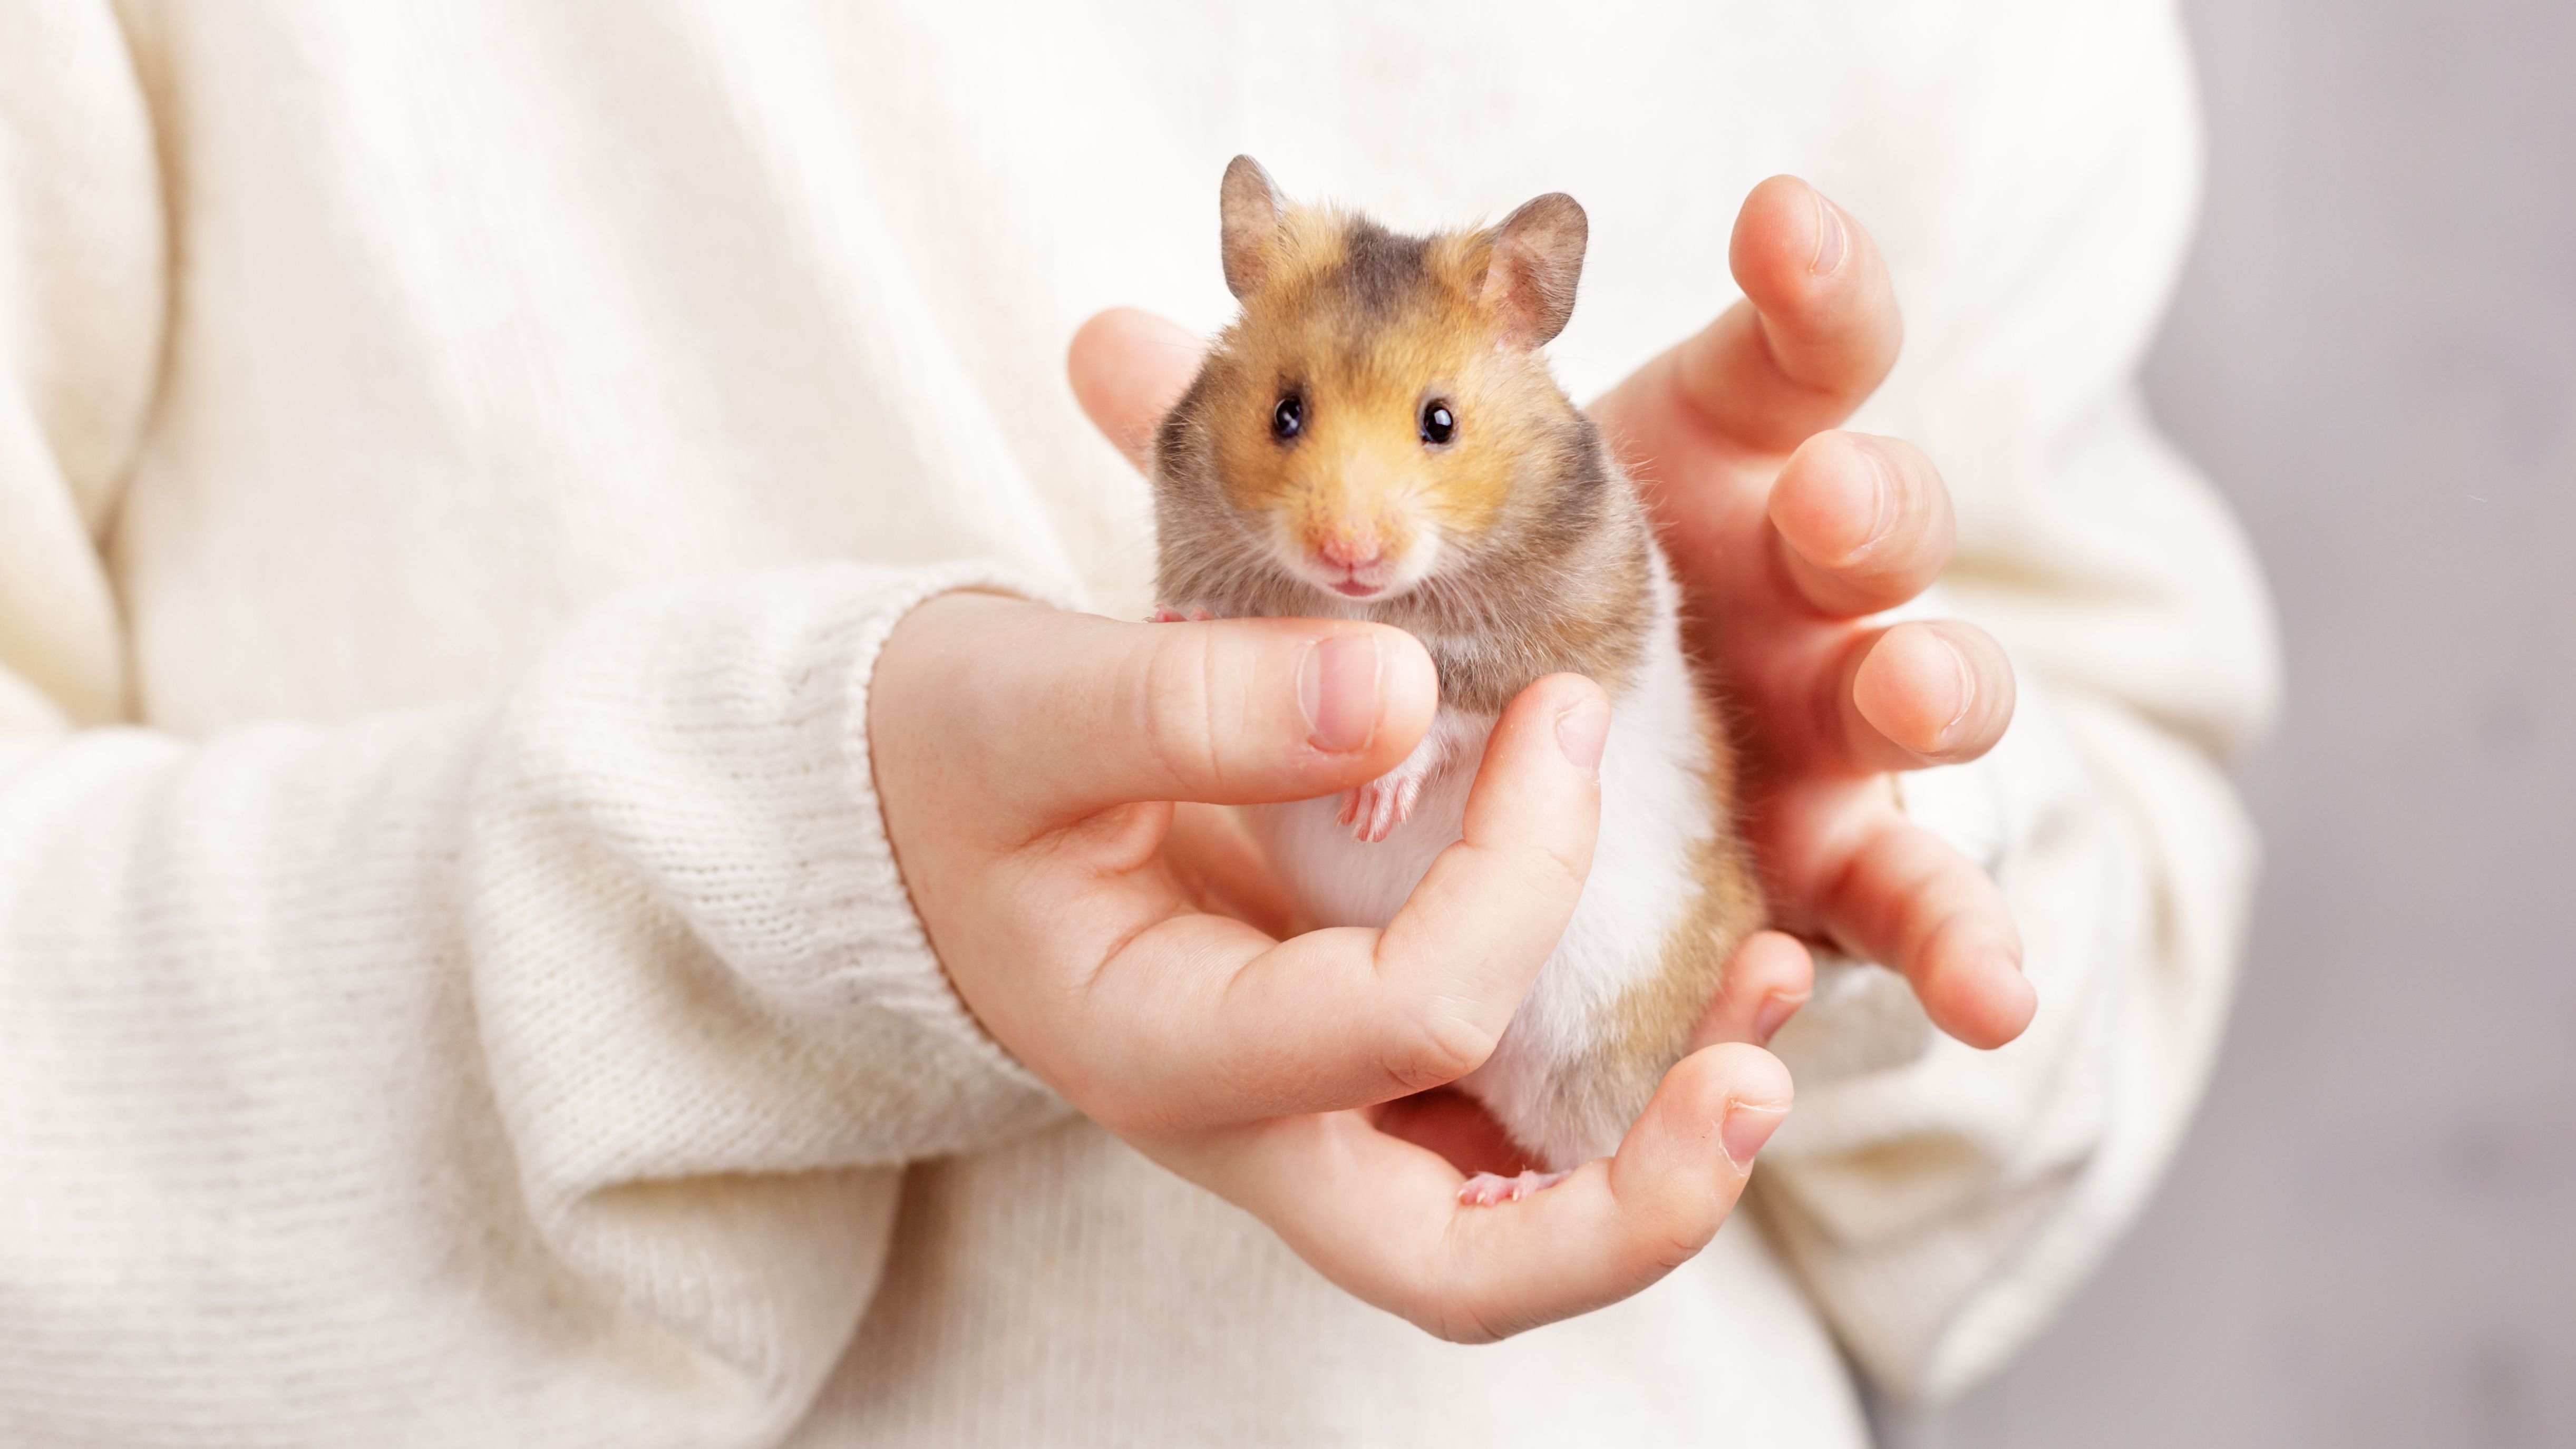 How to Care for Your Hamster: The Basics